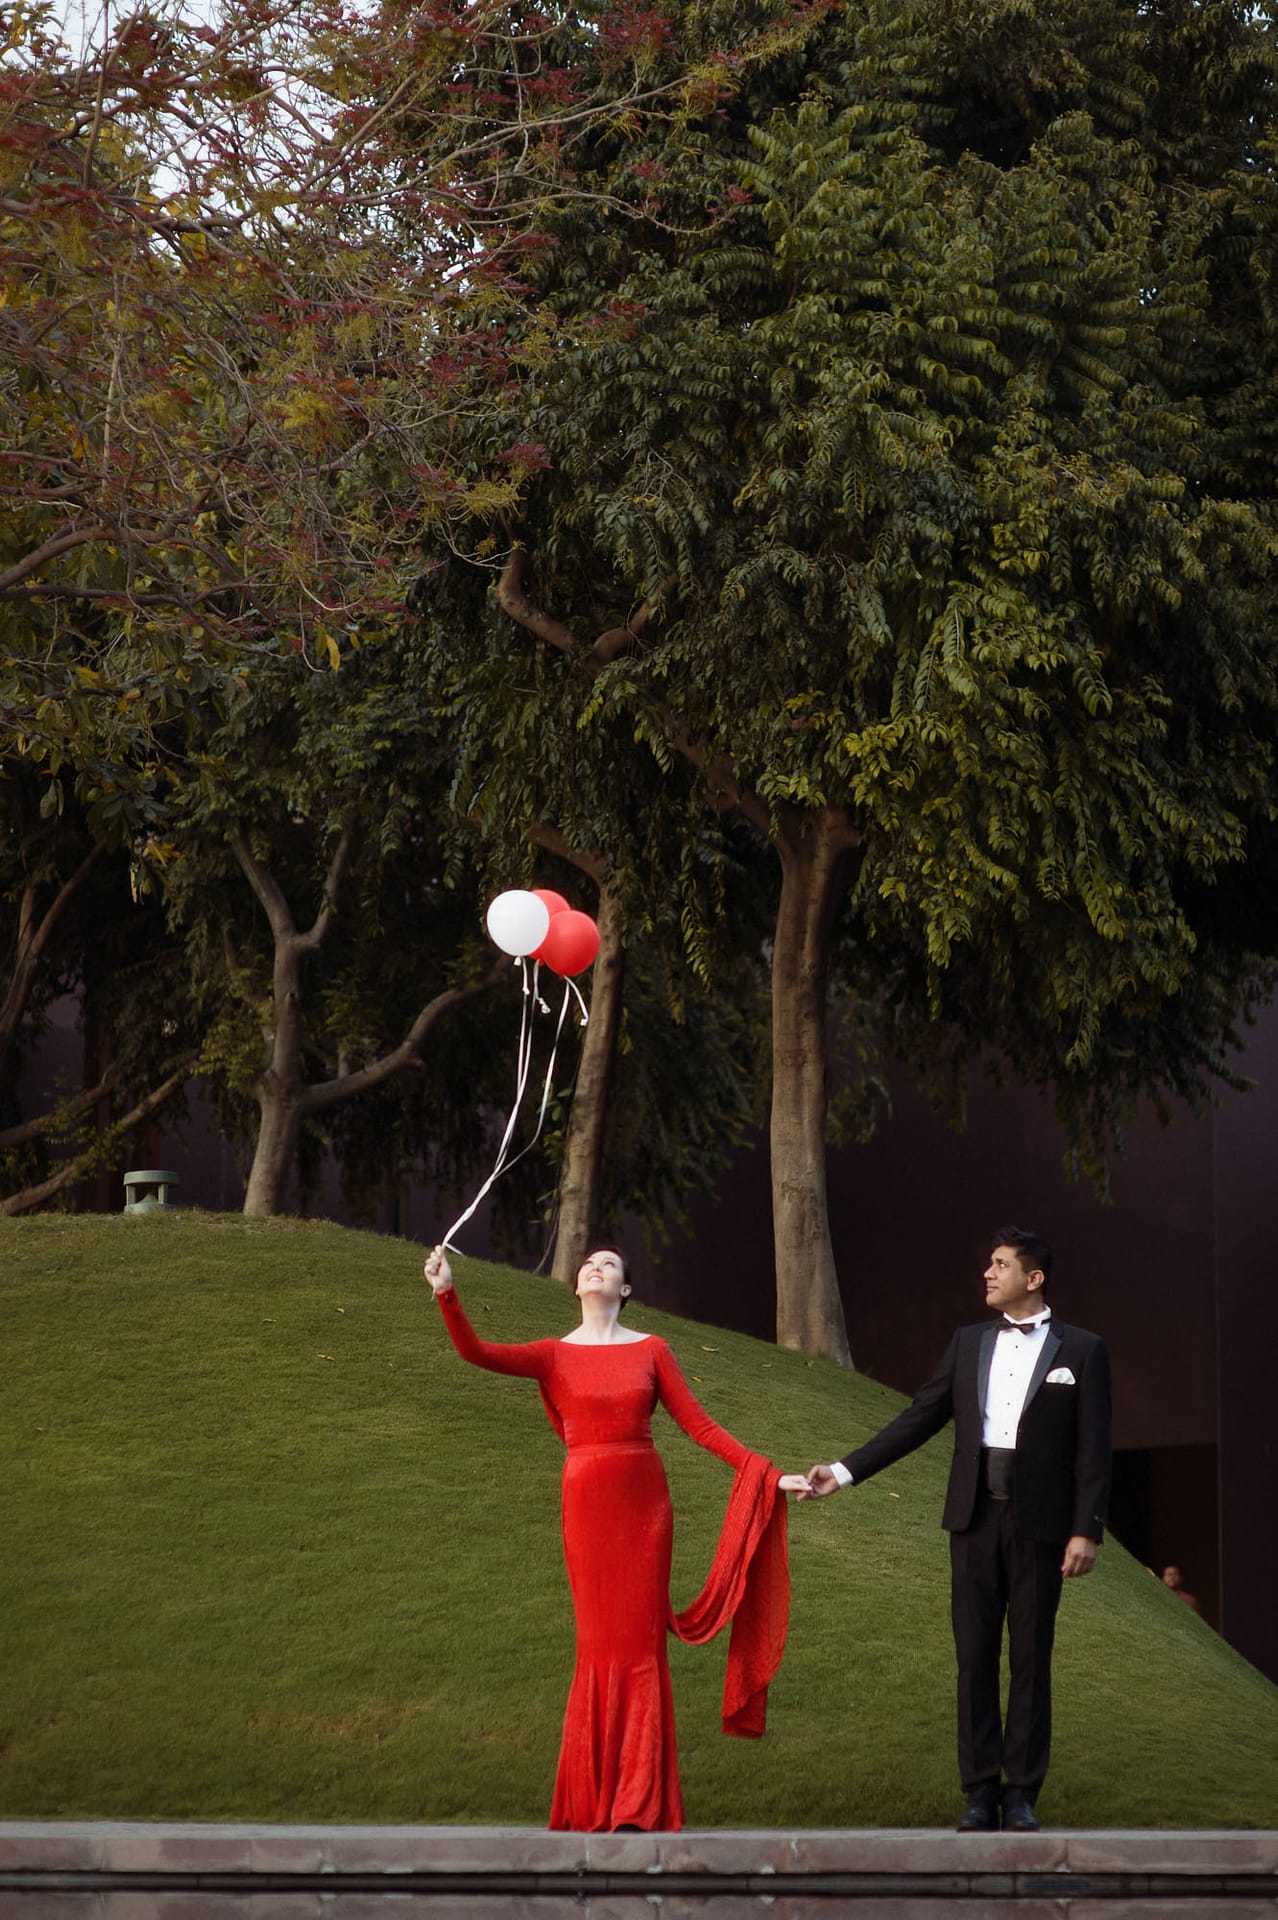 Bride and groom picture with holding balloon